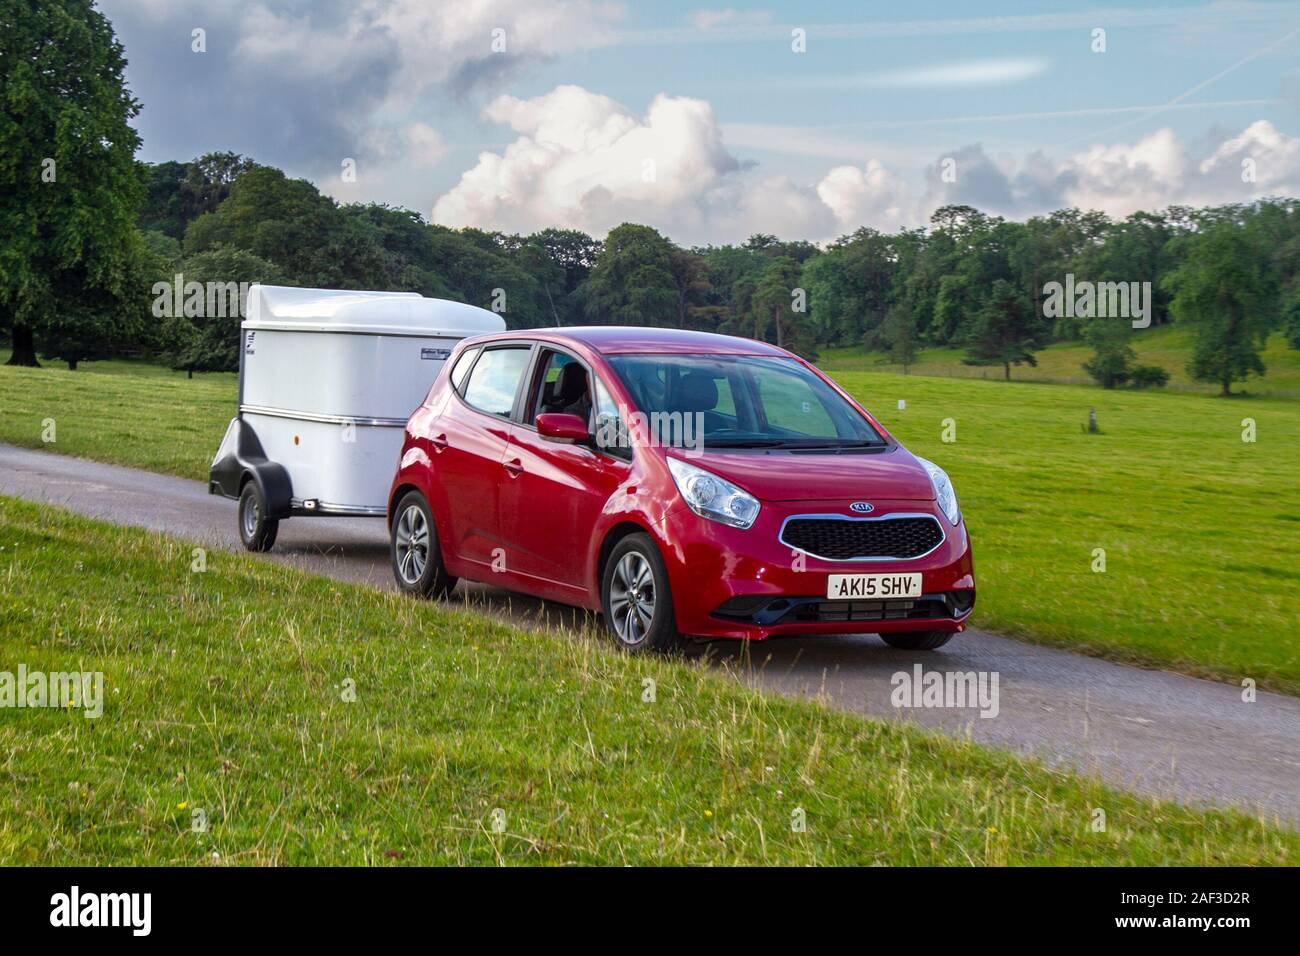 2015 Red Kia Venga Classic cars, historics, cherished,, collectable vehicles arriving for the Mark Woodward historical motoring event at Leighton Hall, Carnforth, UK Stock Photo